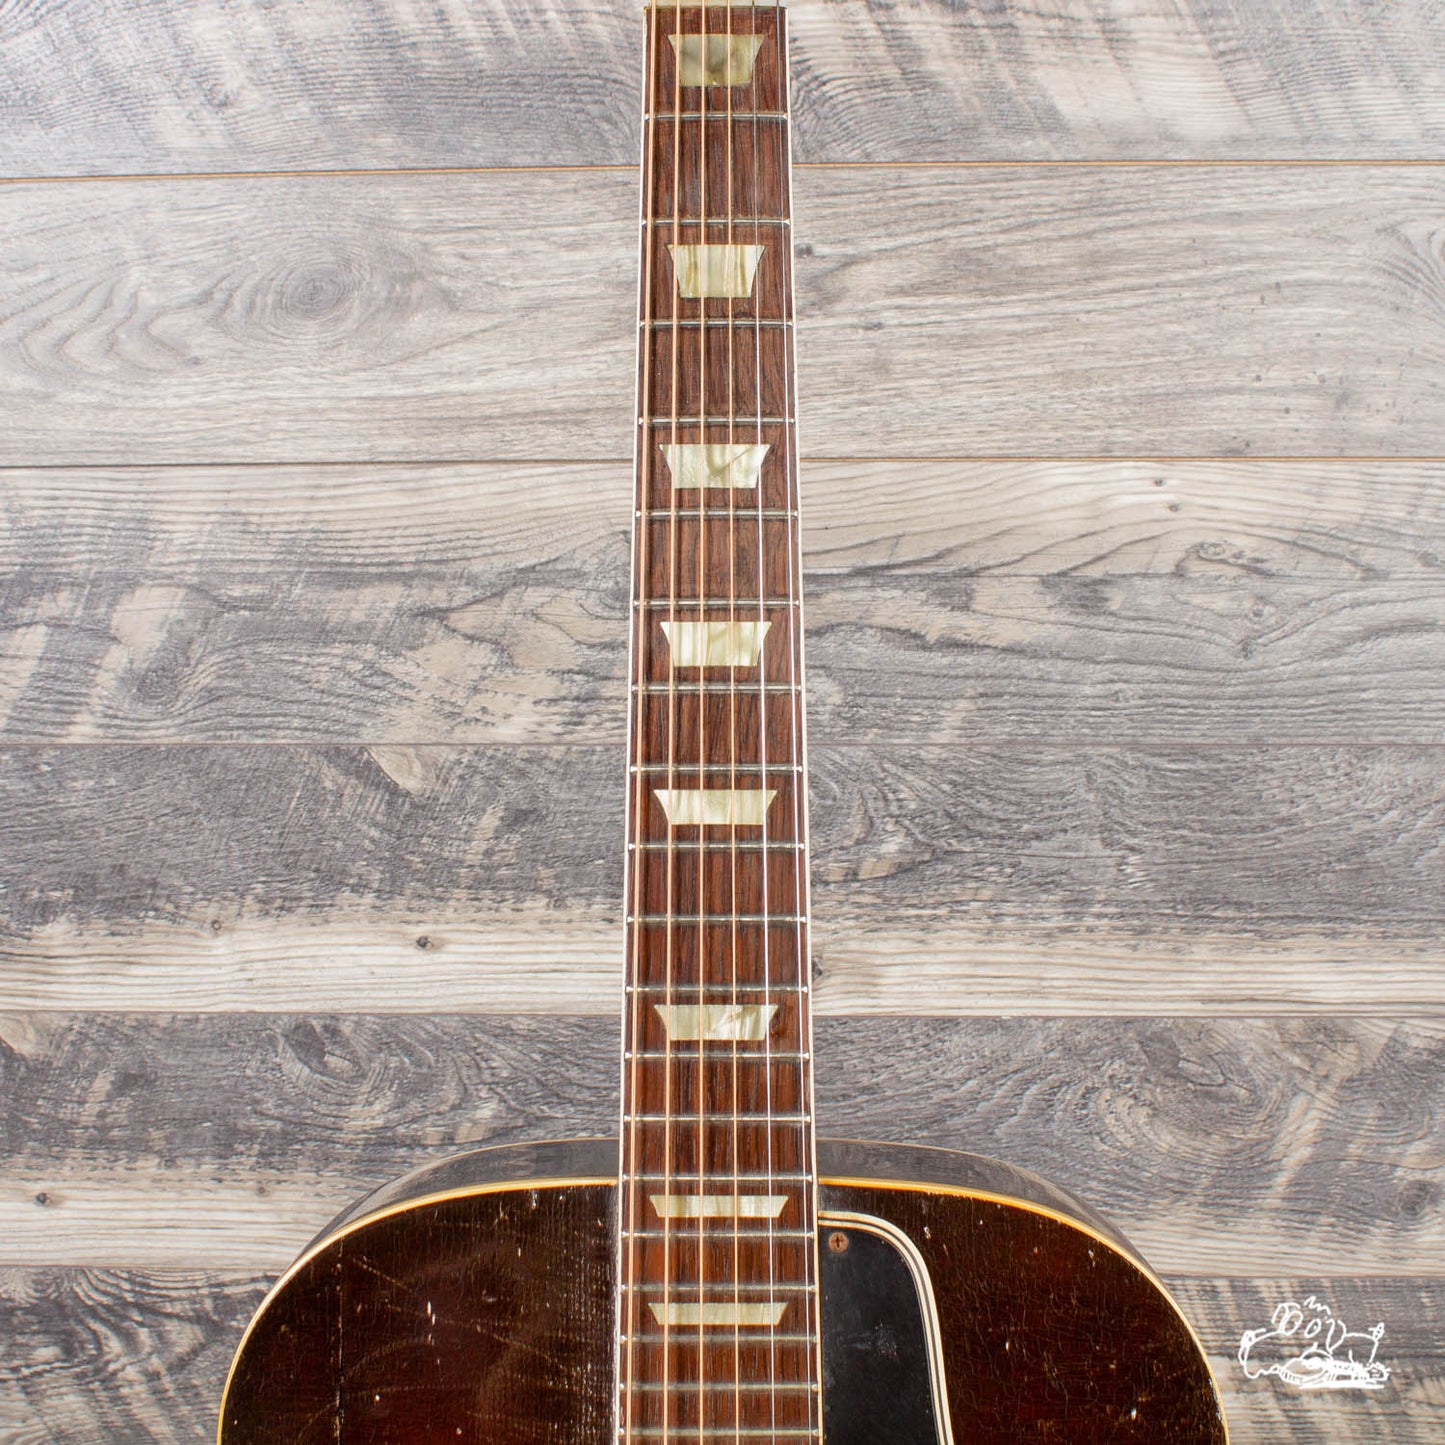 1953 Gibson L-50